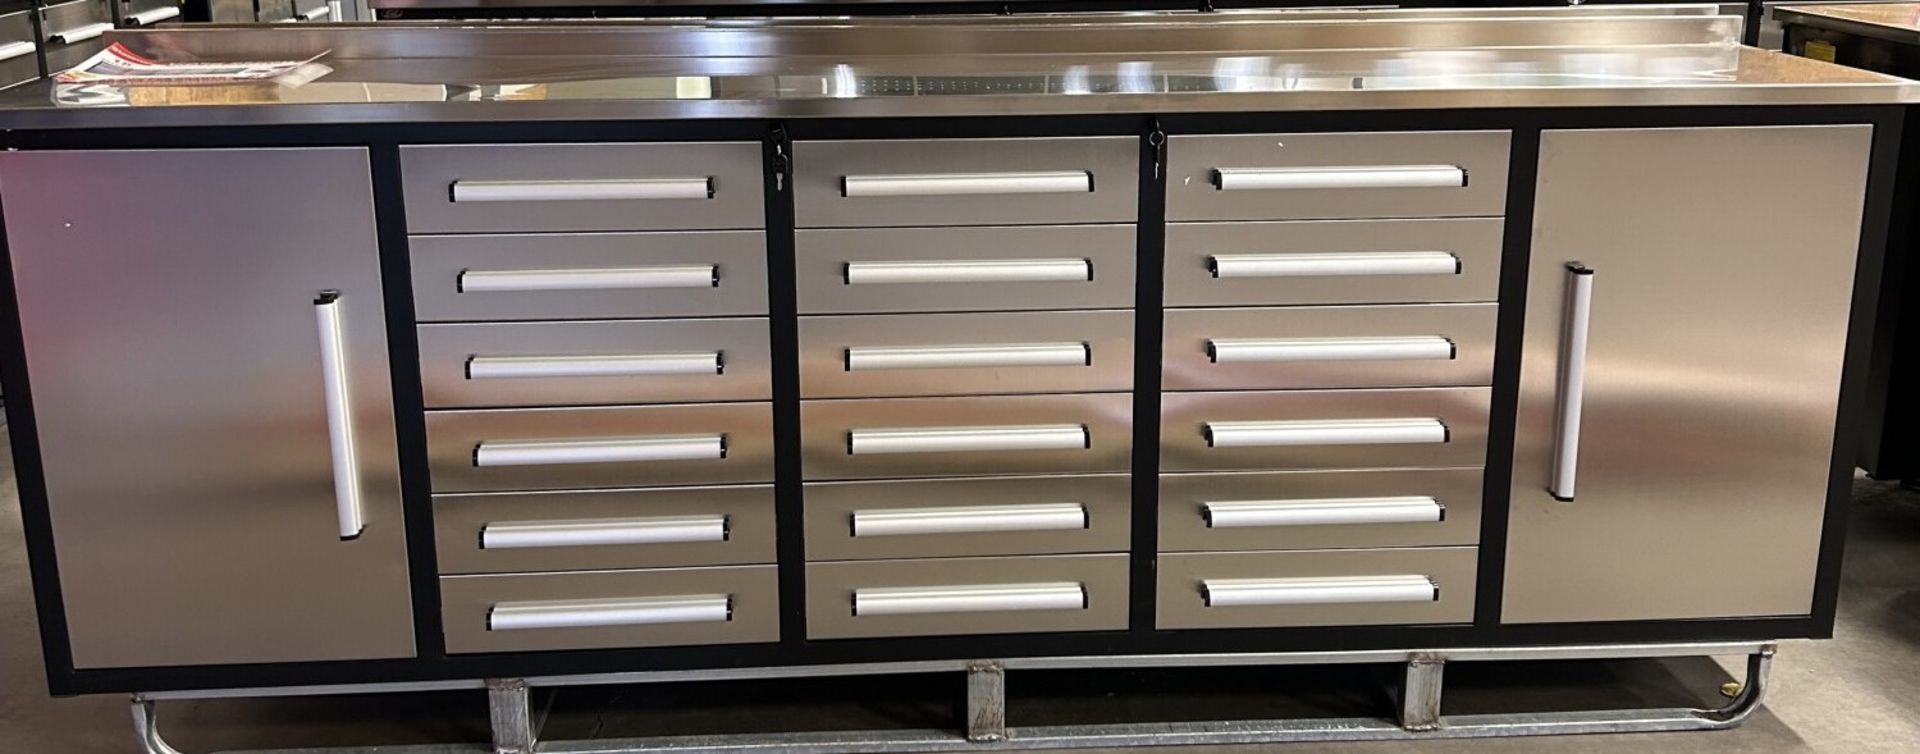 UNUSED 2024 STEELMAN 10 FT WORK BENCH WITH 18 DRAWERS & 2 CABINETS. PACKED IN PLASTICS.DRAWERS